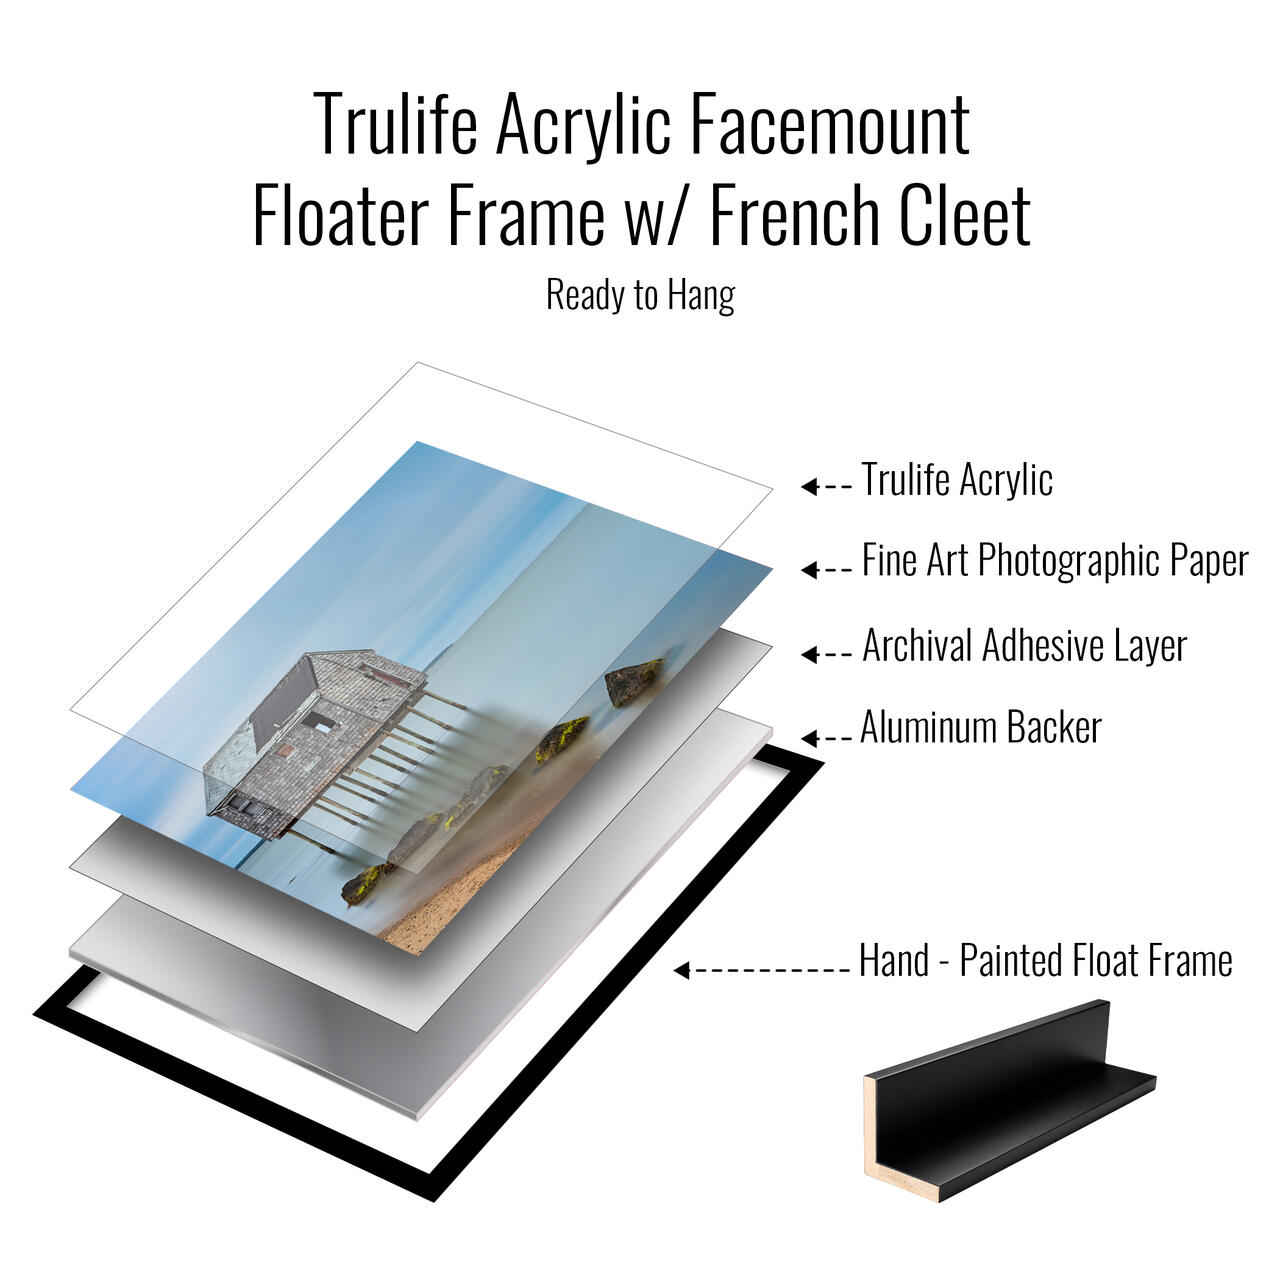 TruLife Acrylic Facemount + Floater Frame